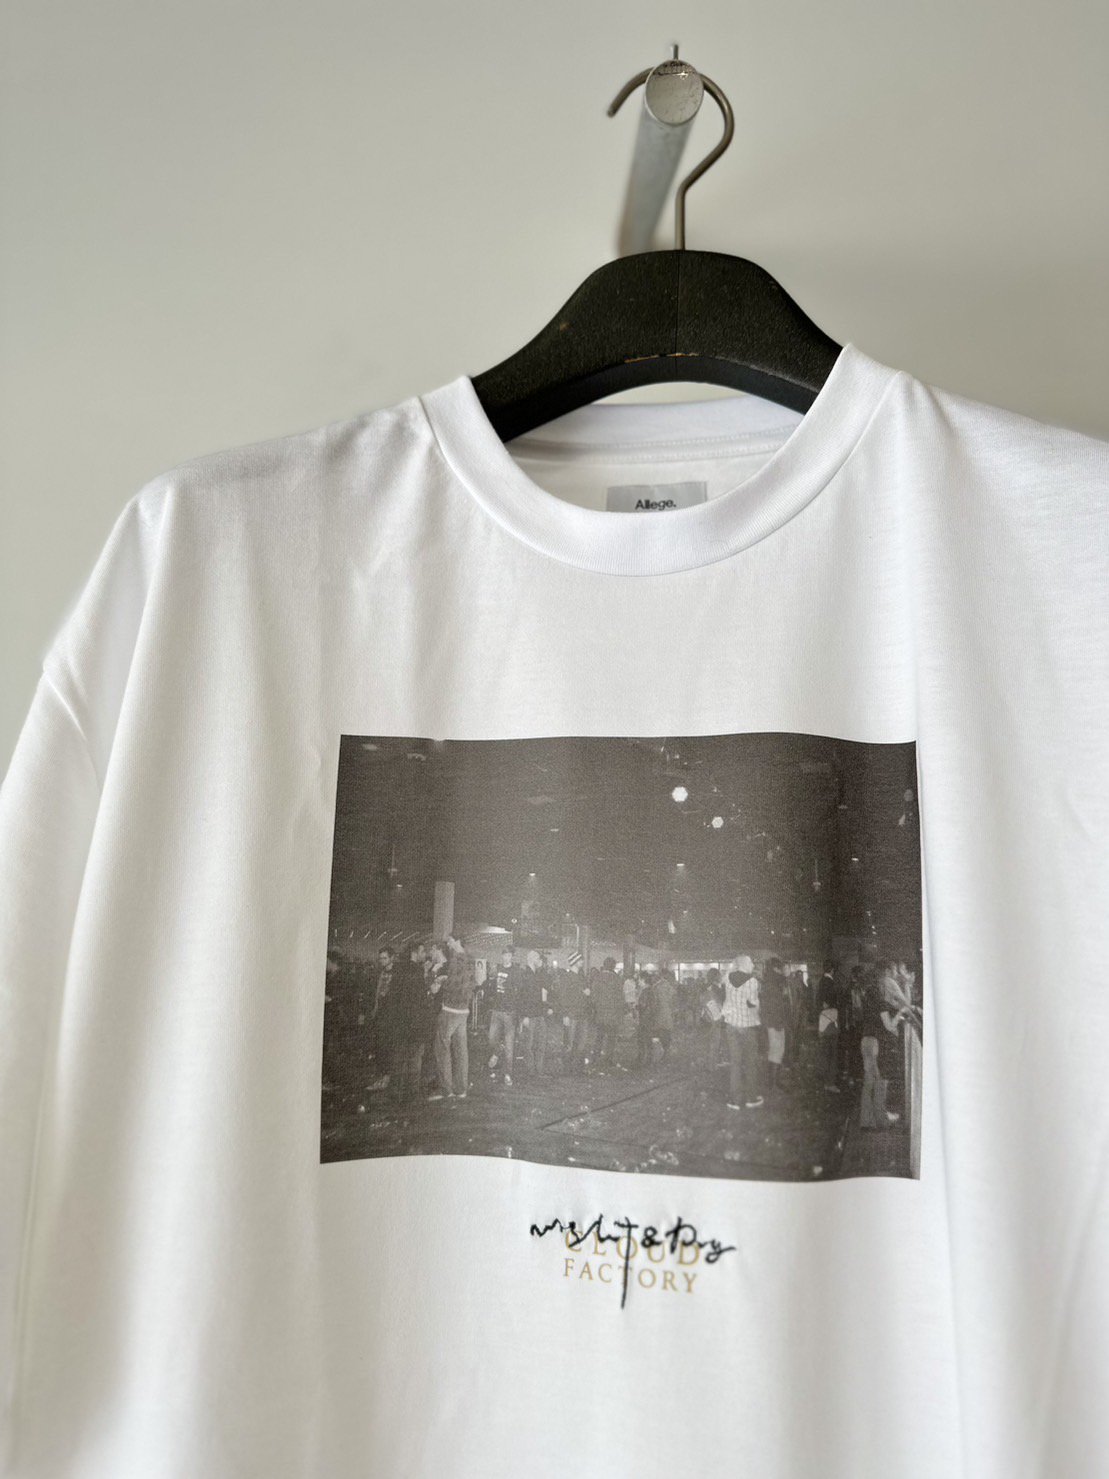 ALLEGE<br />CLOUD FACTORY Tee / White <img class='new_mark_img2' src='https://img.shop-pro.jp/img/new/icons14.gif' style='border:none;display:inline;margin:0px;padding:0px;width:auto;' />